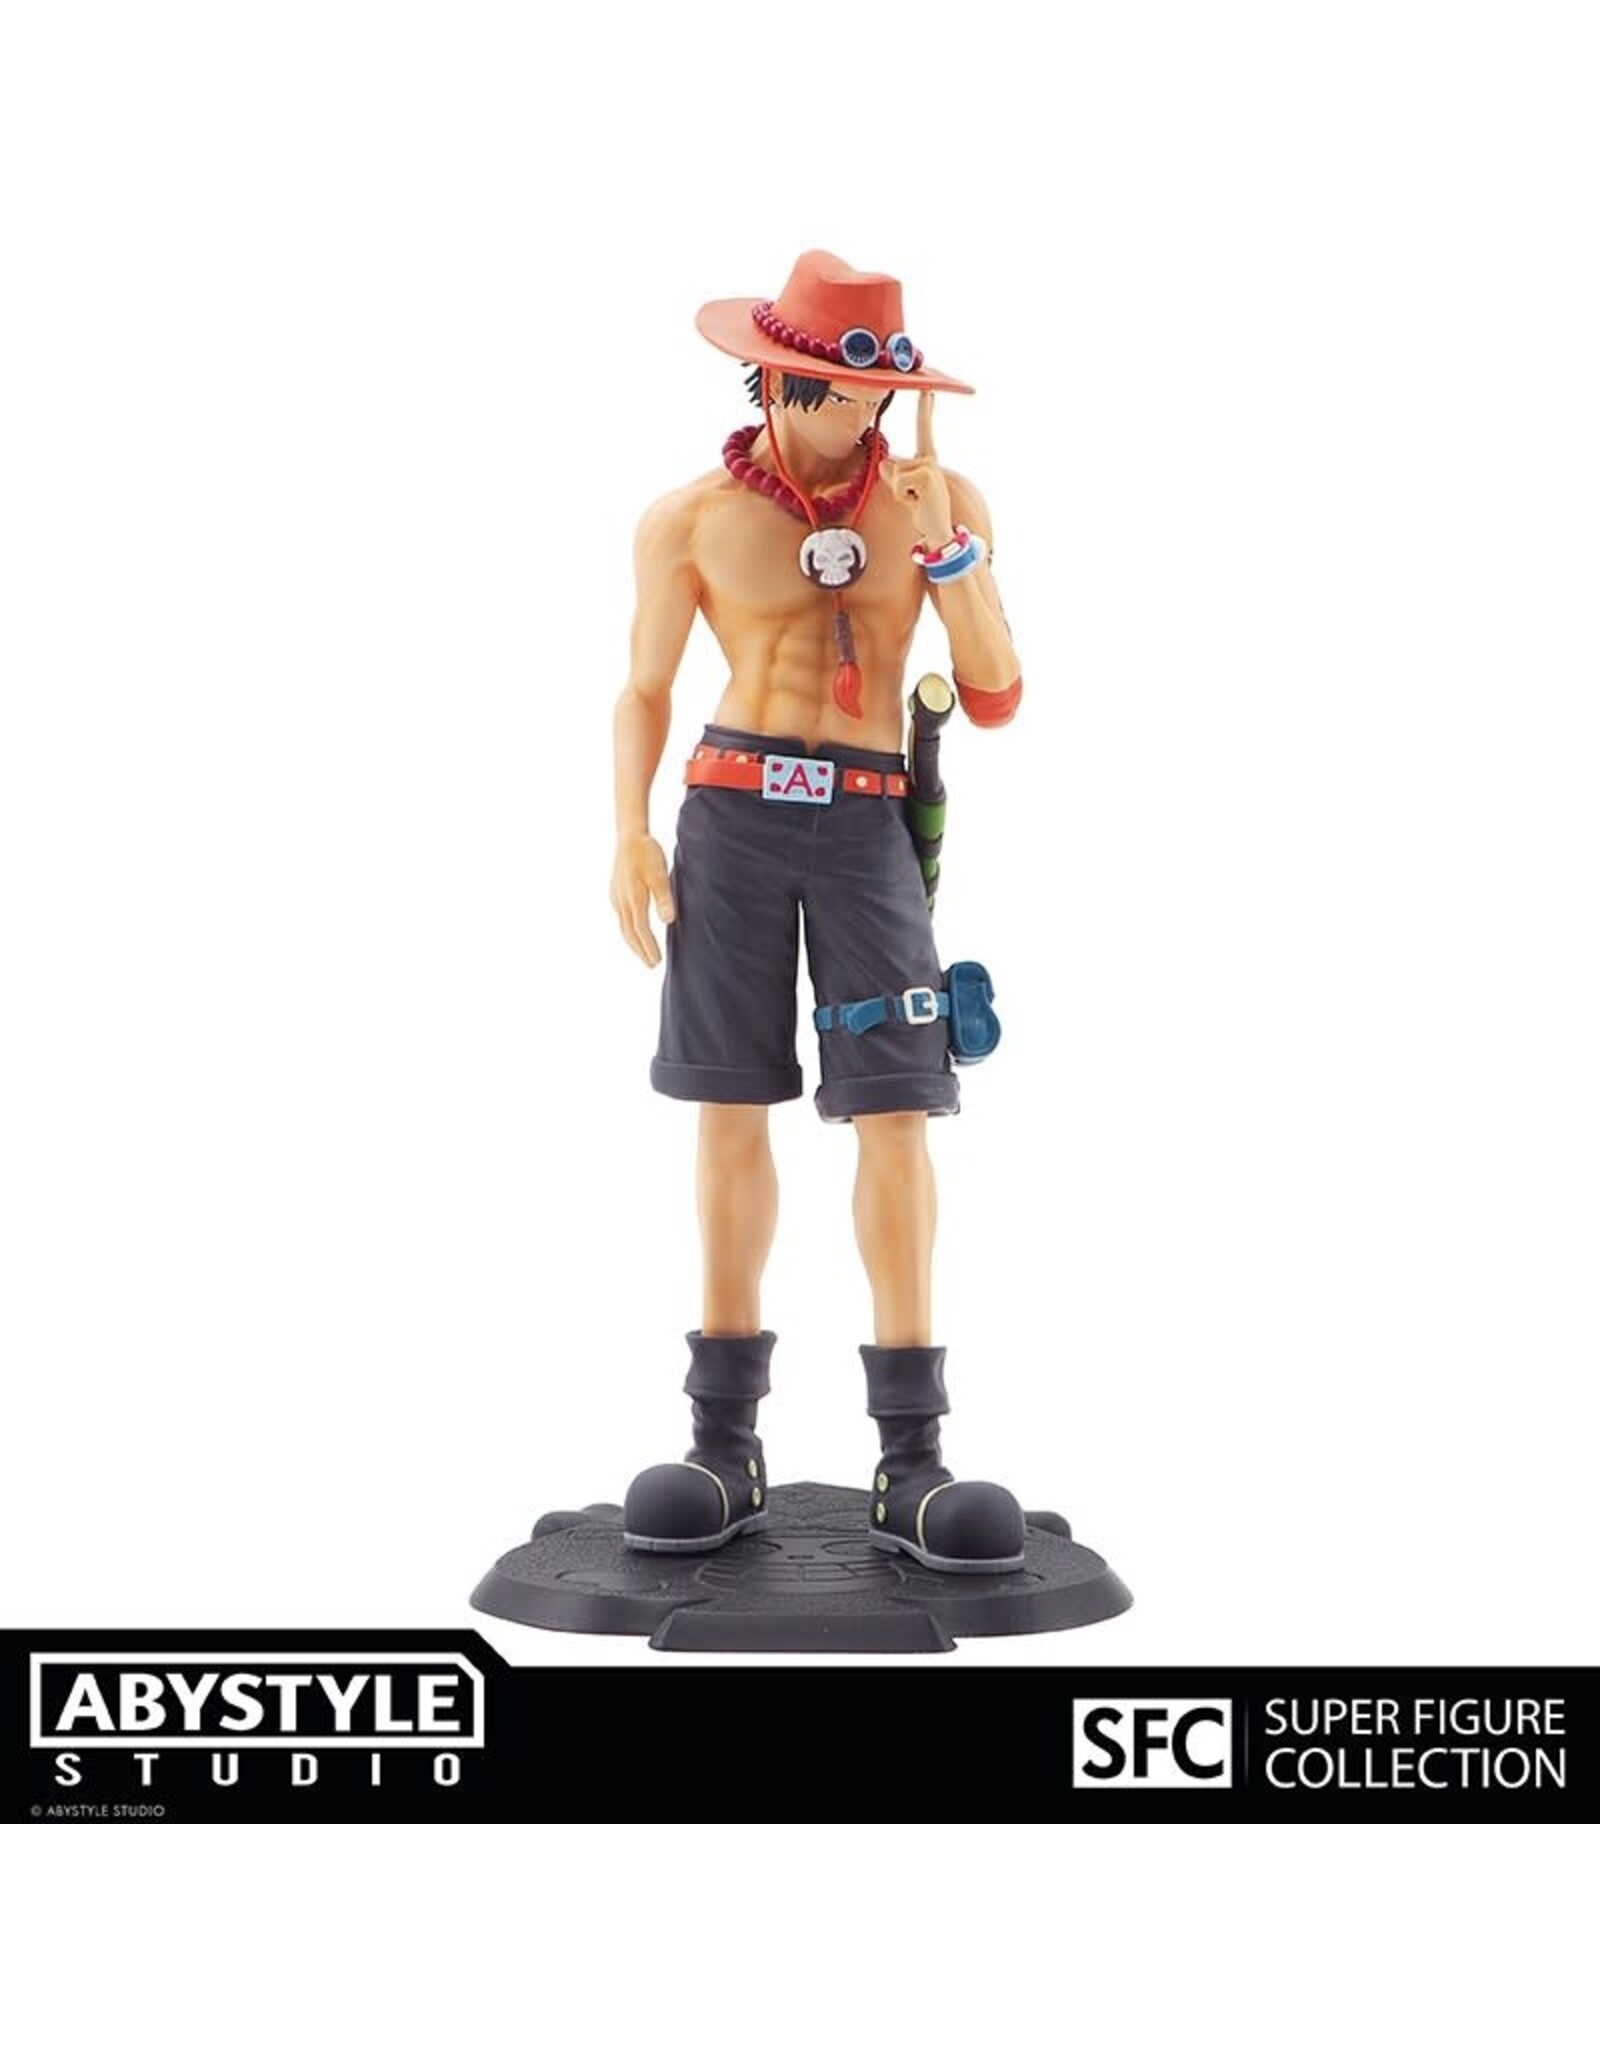 ABYSTYLE Super Figure Collection : One Piece - Portgas D. Ace Figure